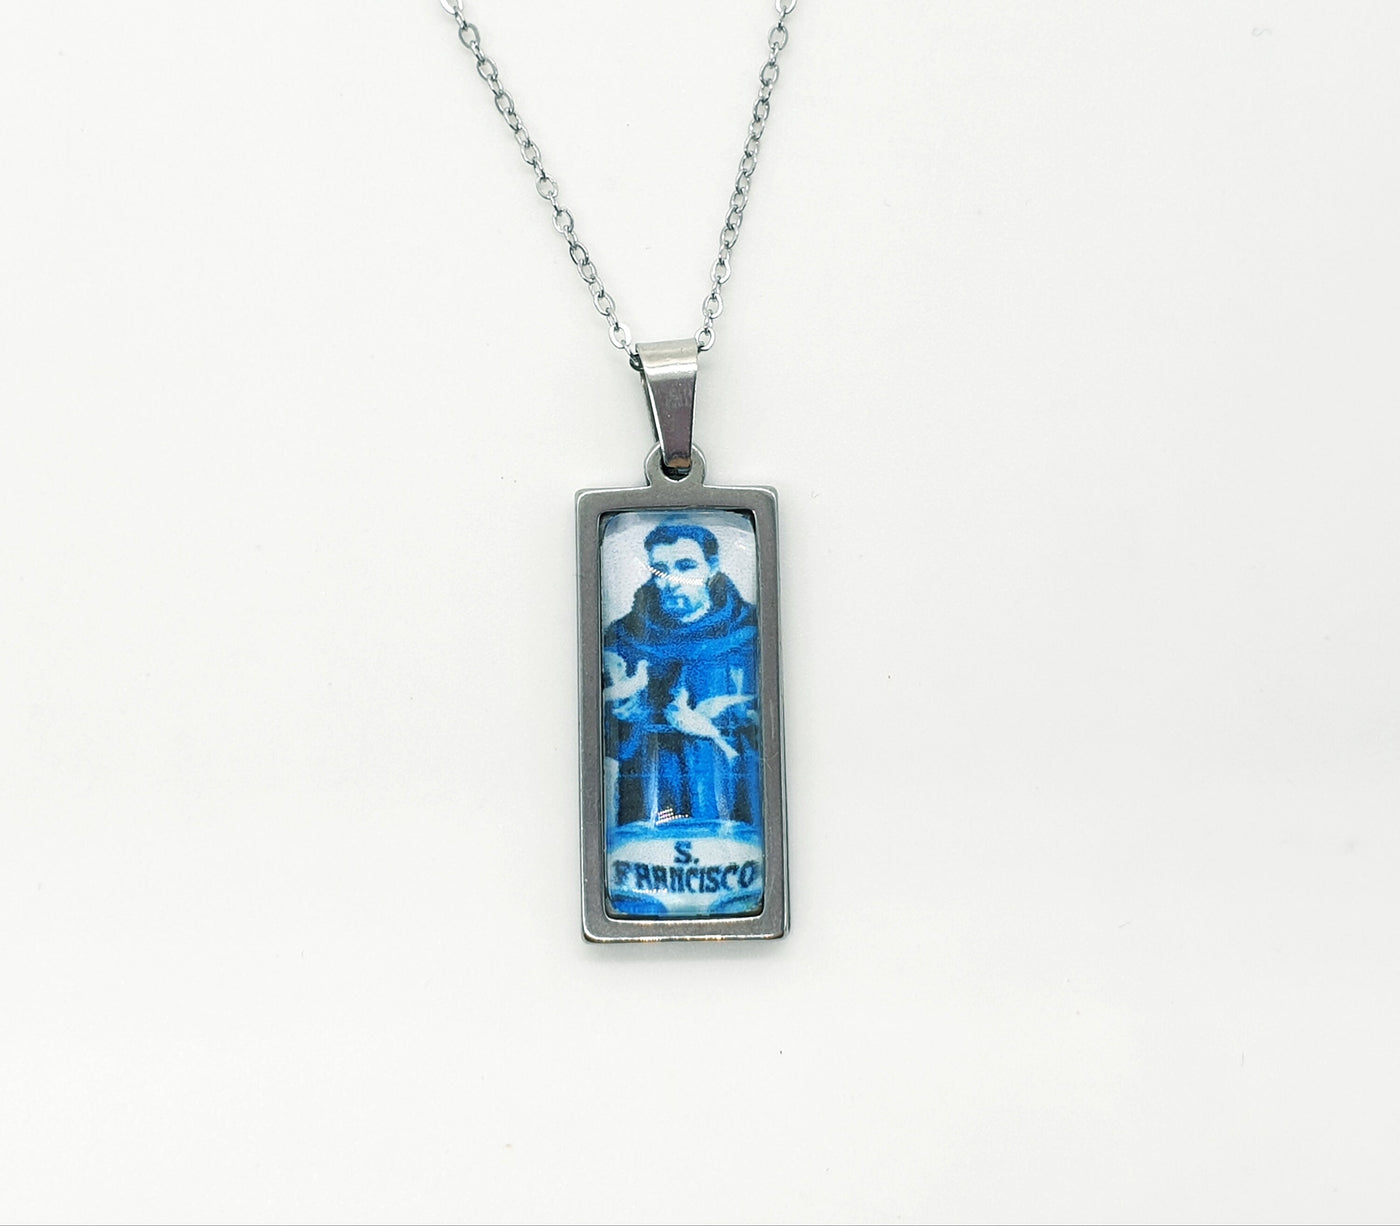 S. Francisco Xavier Necklace Portugal Azulejo Tile Patron of All Missions Religious Gift Christian Bar Pendant Saint Francis